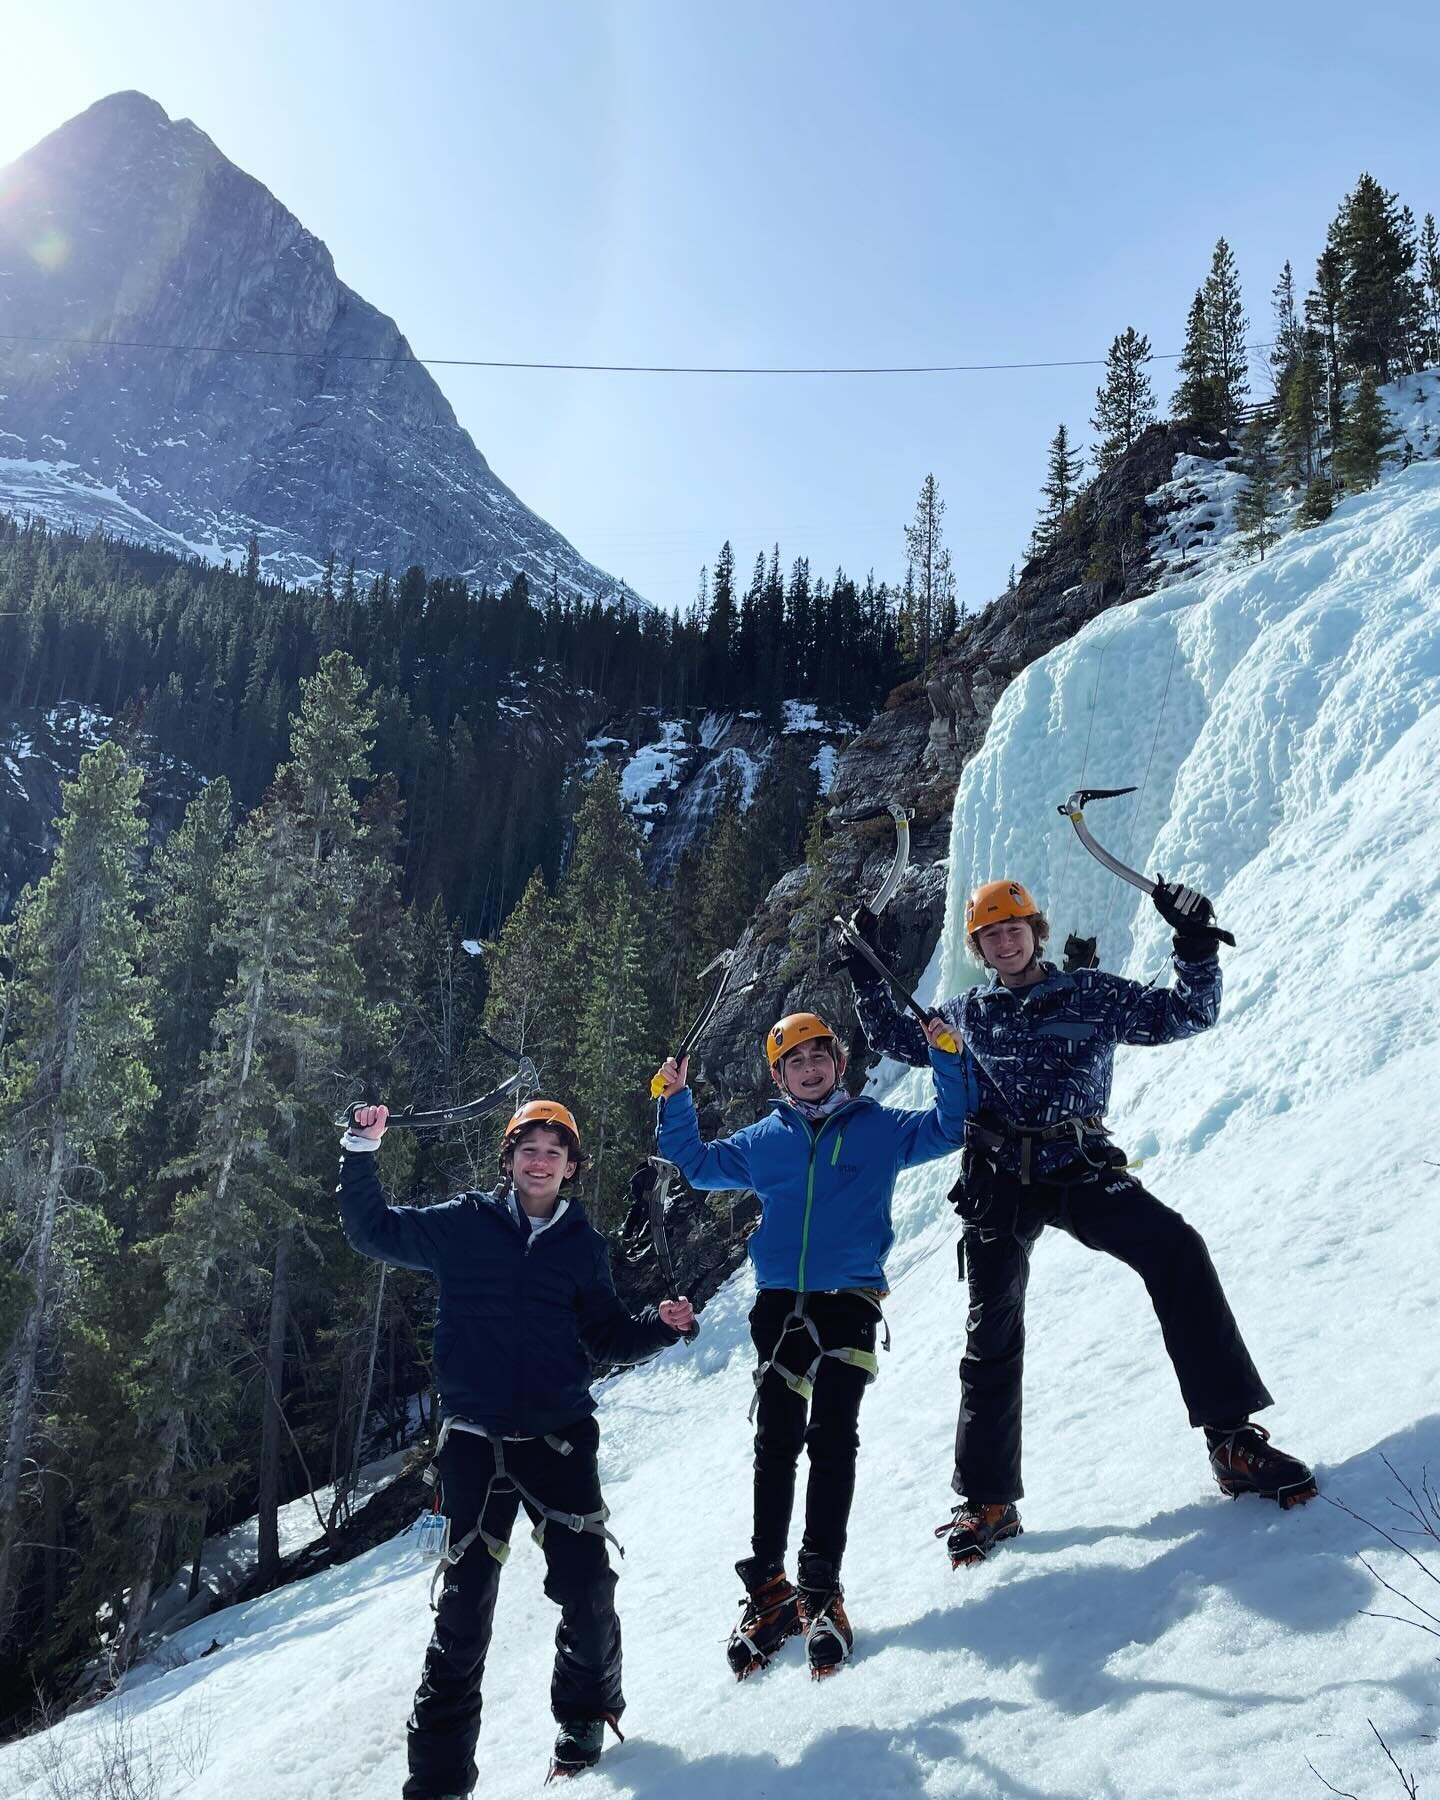 Stoking the youth last week with @rockiesalpineguide we love getting young people outside and stoked! Ice climbing is a sport anyone can enjoy, especially on a warm spring day ☀️😀 📸 @andrew_rennie_for_real